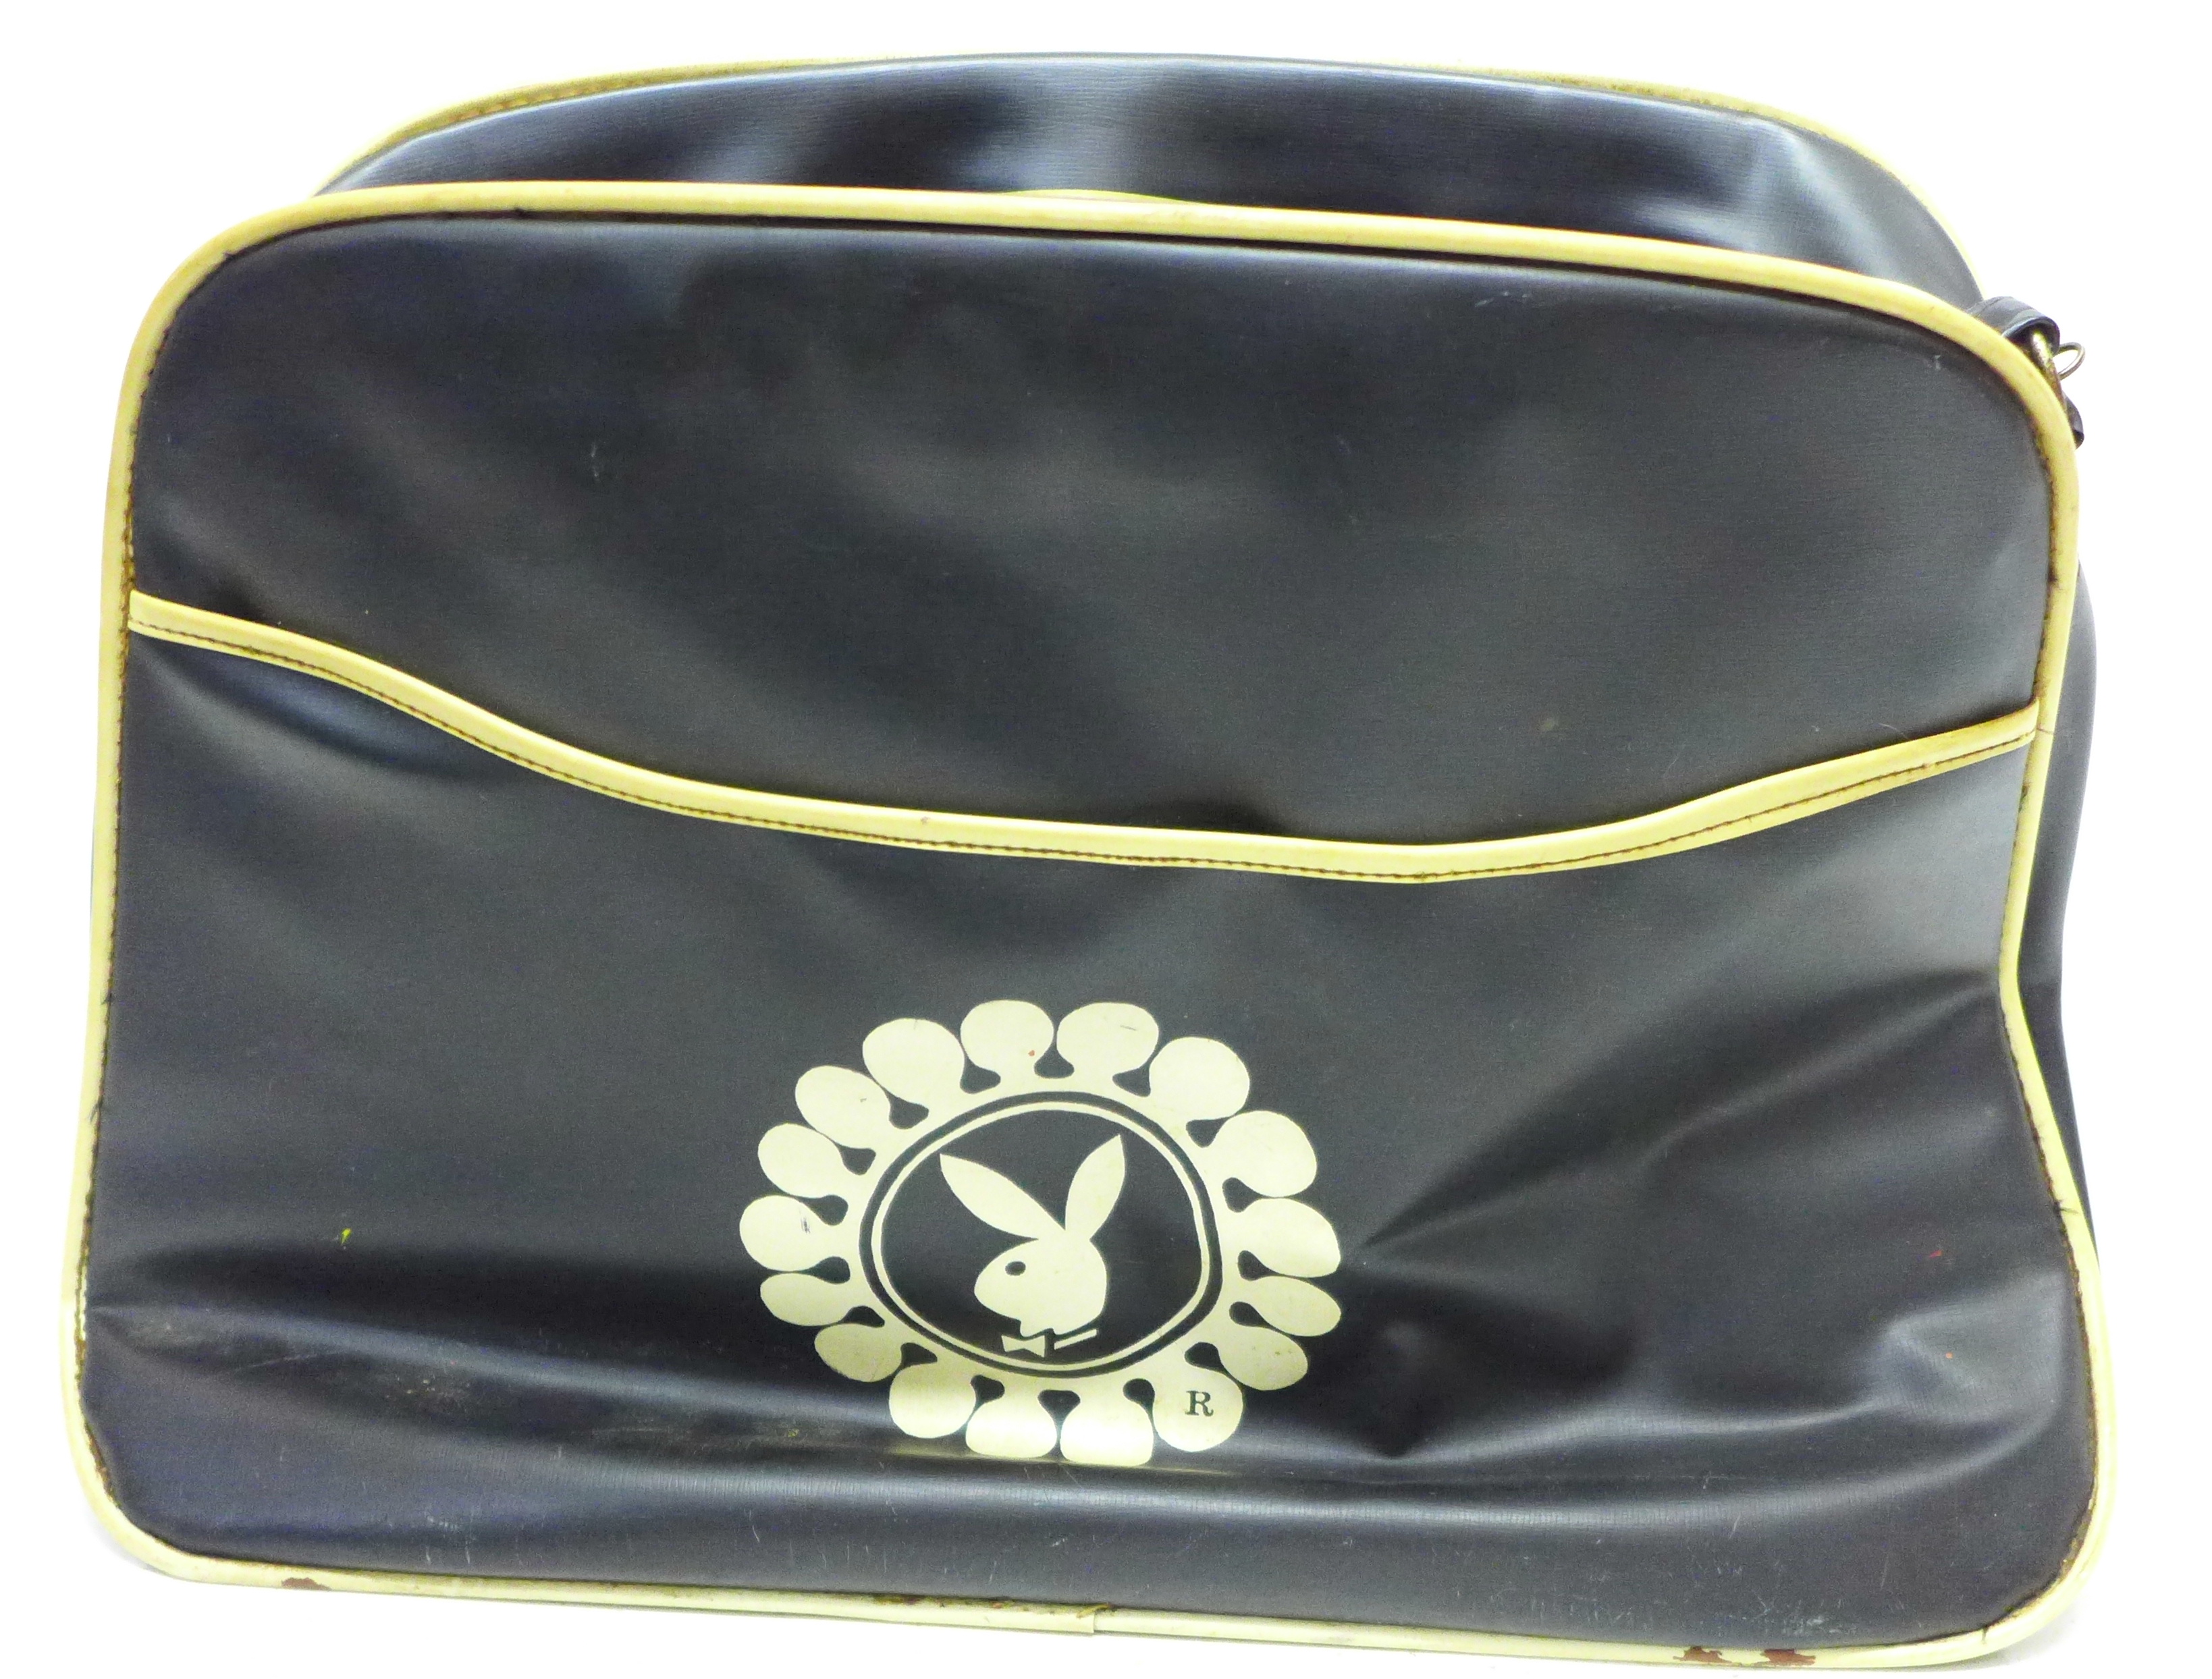 A 1960's The London Playboy Club holdall bag and a Don Juan Night Club entertainment card - Image 2 of 5